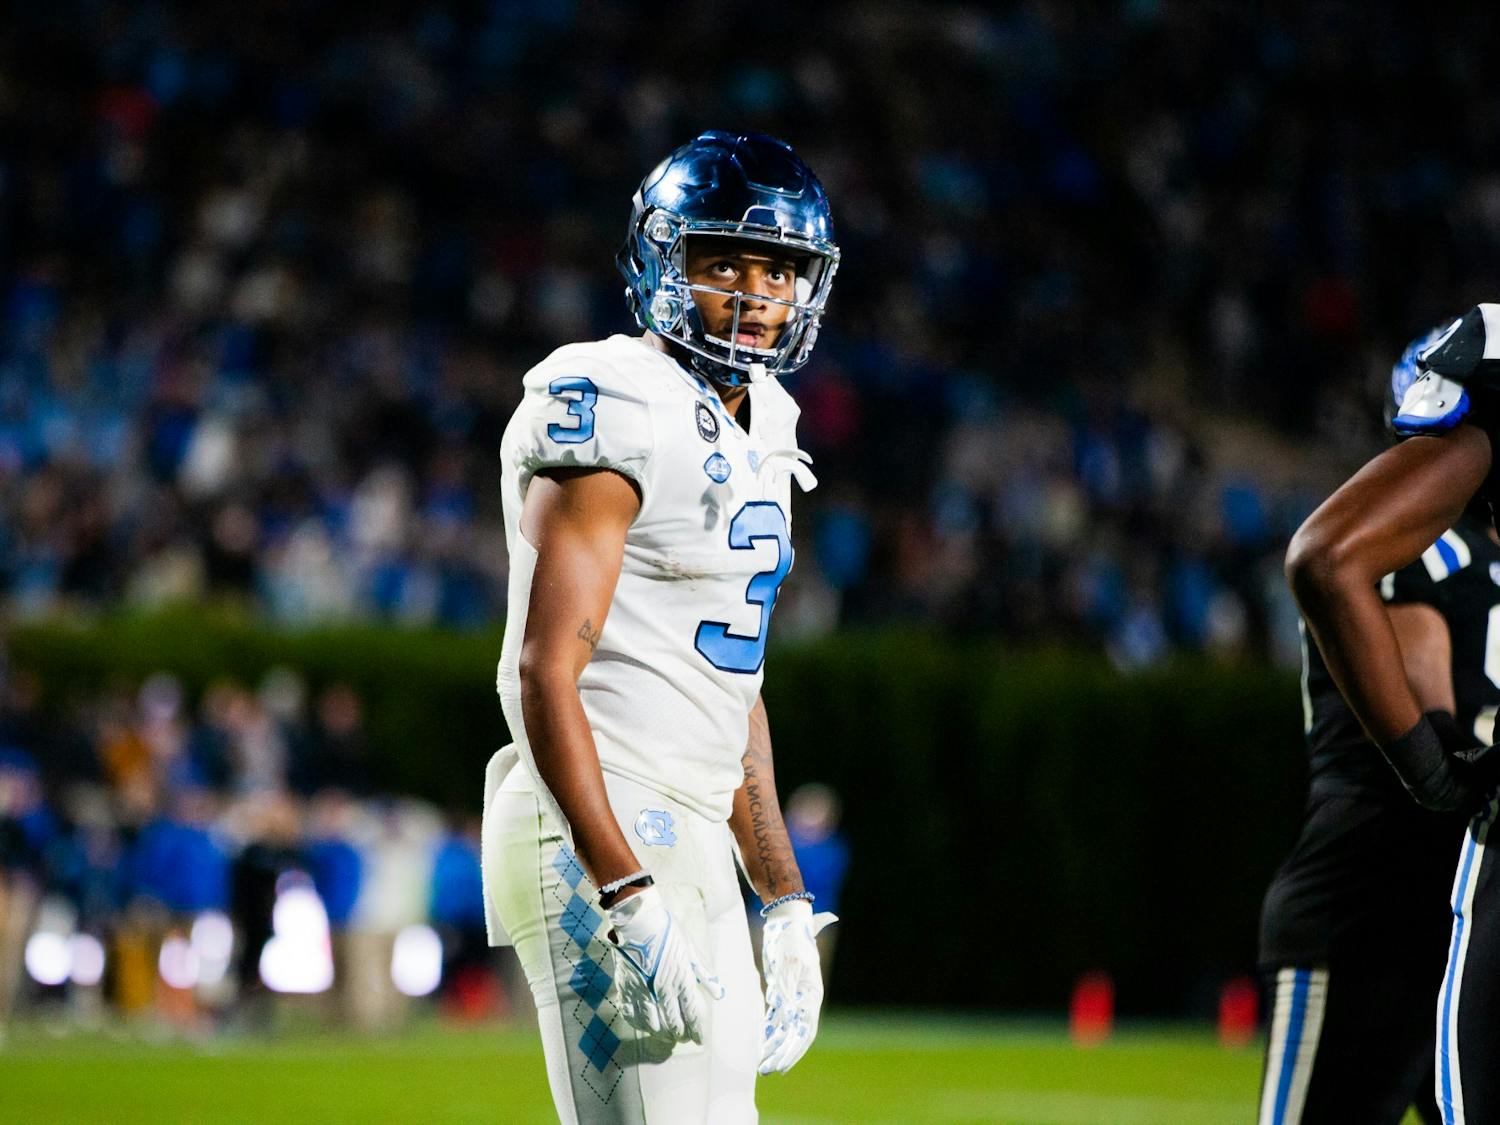 UNC senior wide receiver, Antoine Green (3), watches as the referees confirm his challenged touchdown in Wallace Wade Stadium on Oct. 15, 2022, in UNC’s faceoff against Duke. UNC won 38-35.